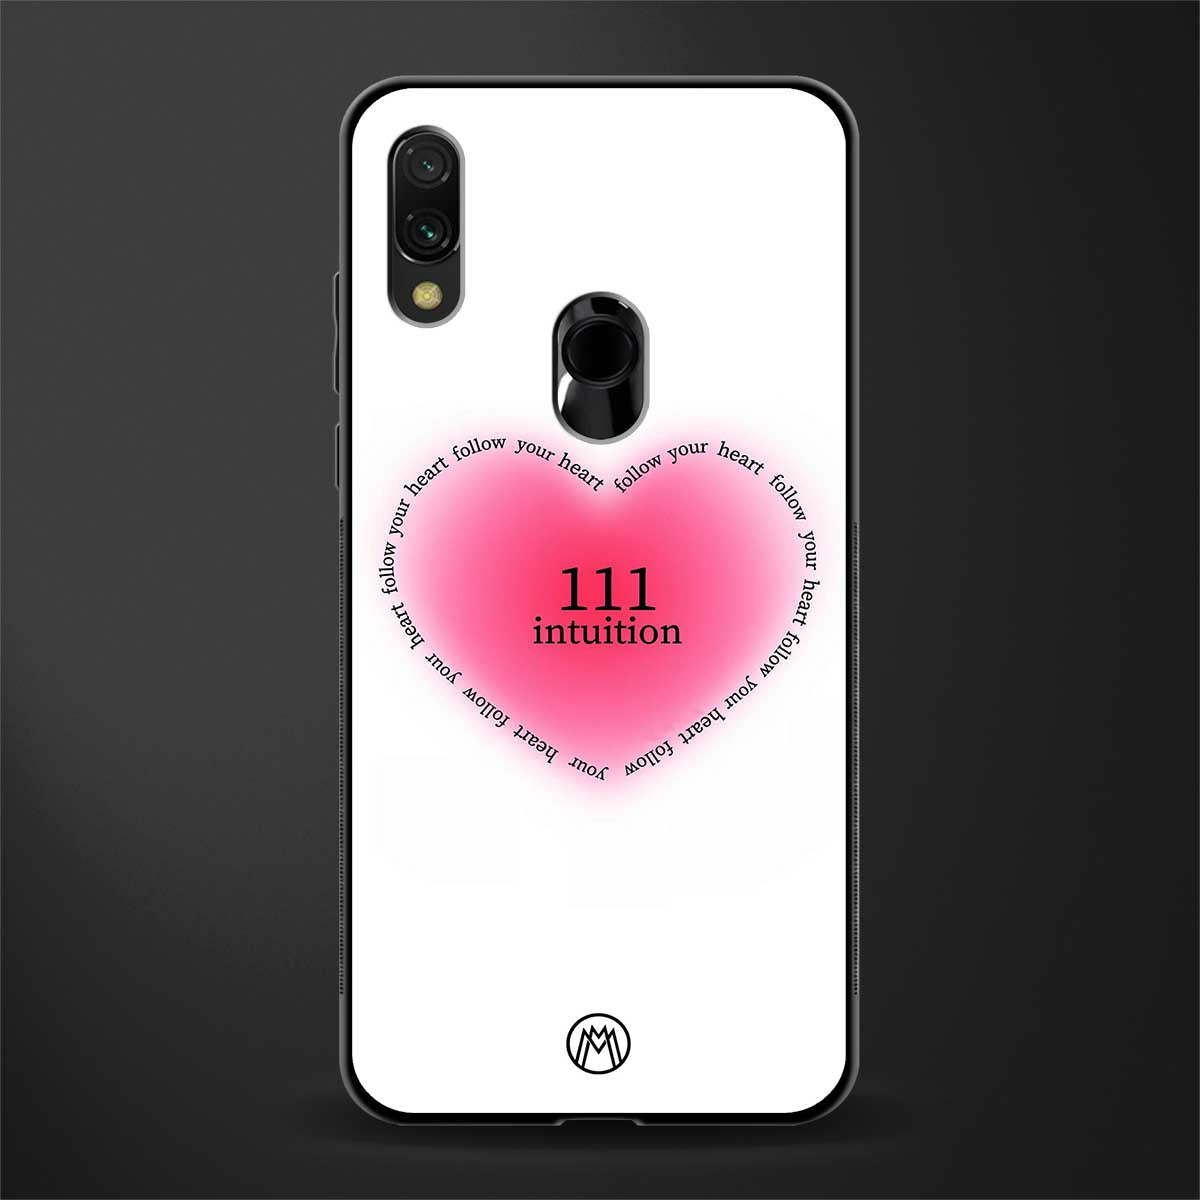 111 intuition glass case for redmi note 7 pro image